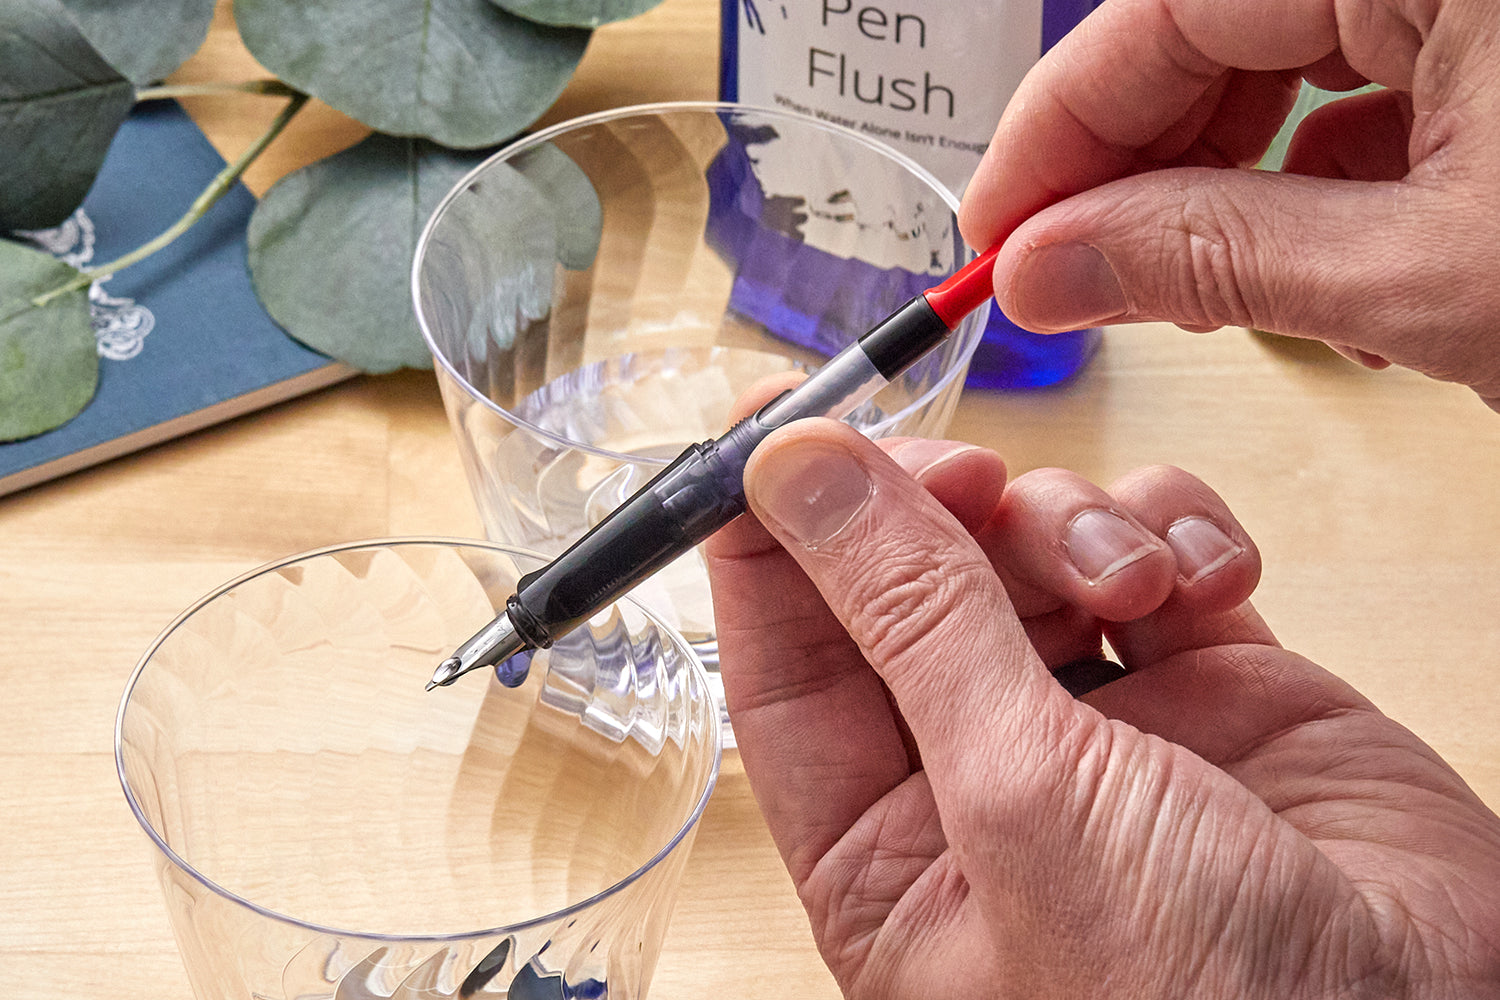 How to Clean a Fountain Pen